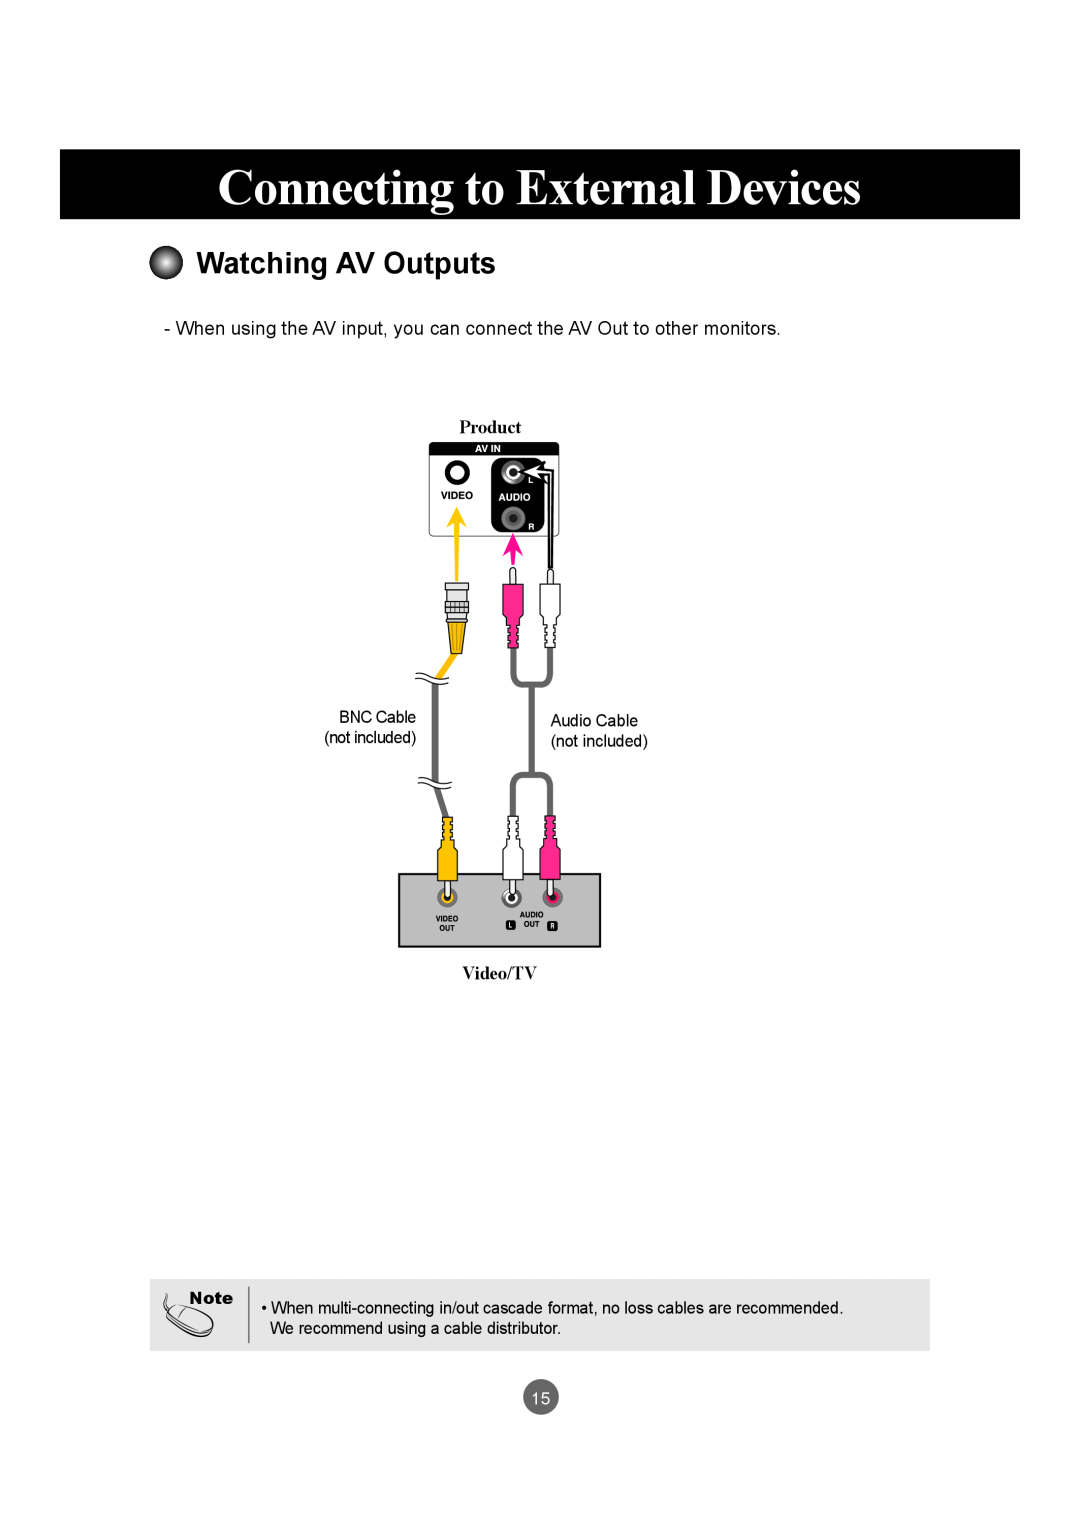 LG Electronics M4210LCBA owner manual Watching AV Outputs, Connecting to External Devices, Product, Video/TV 